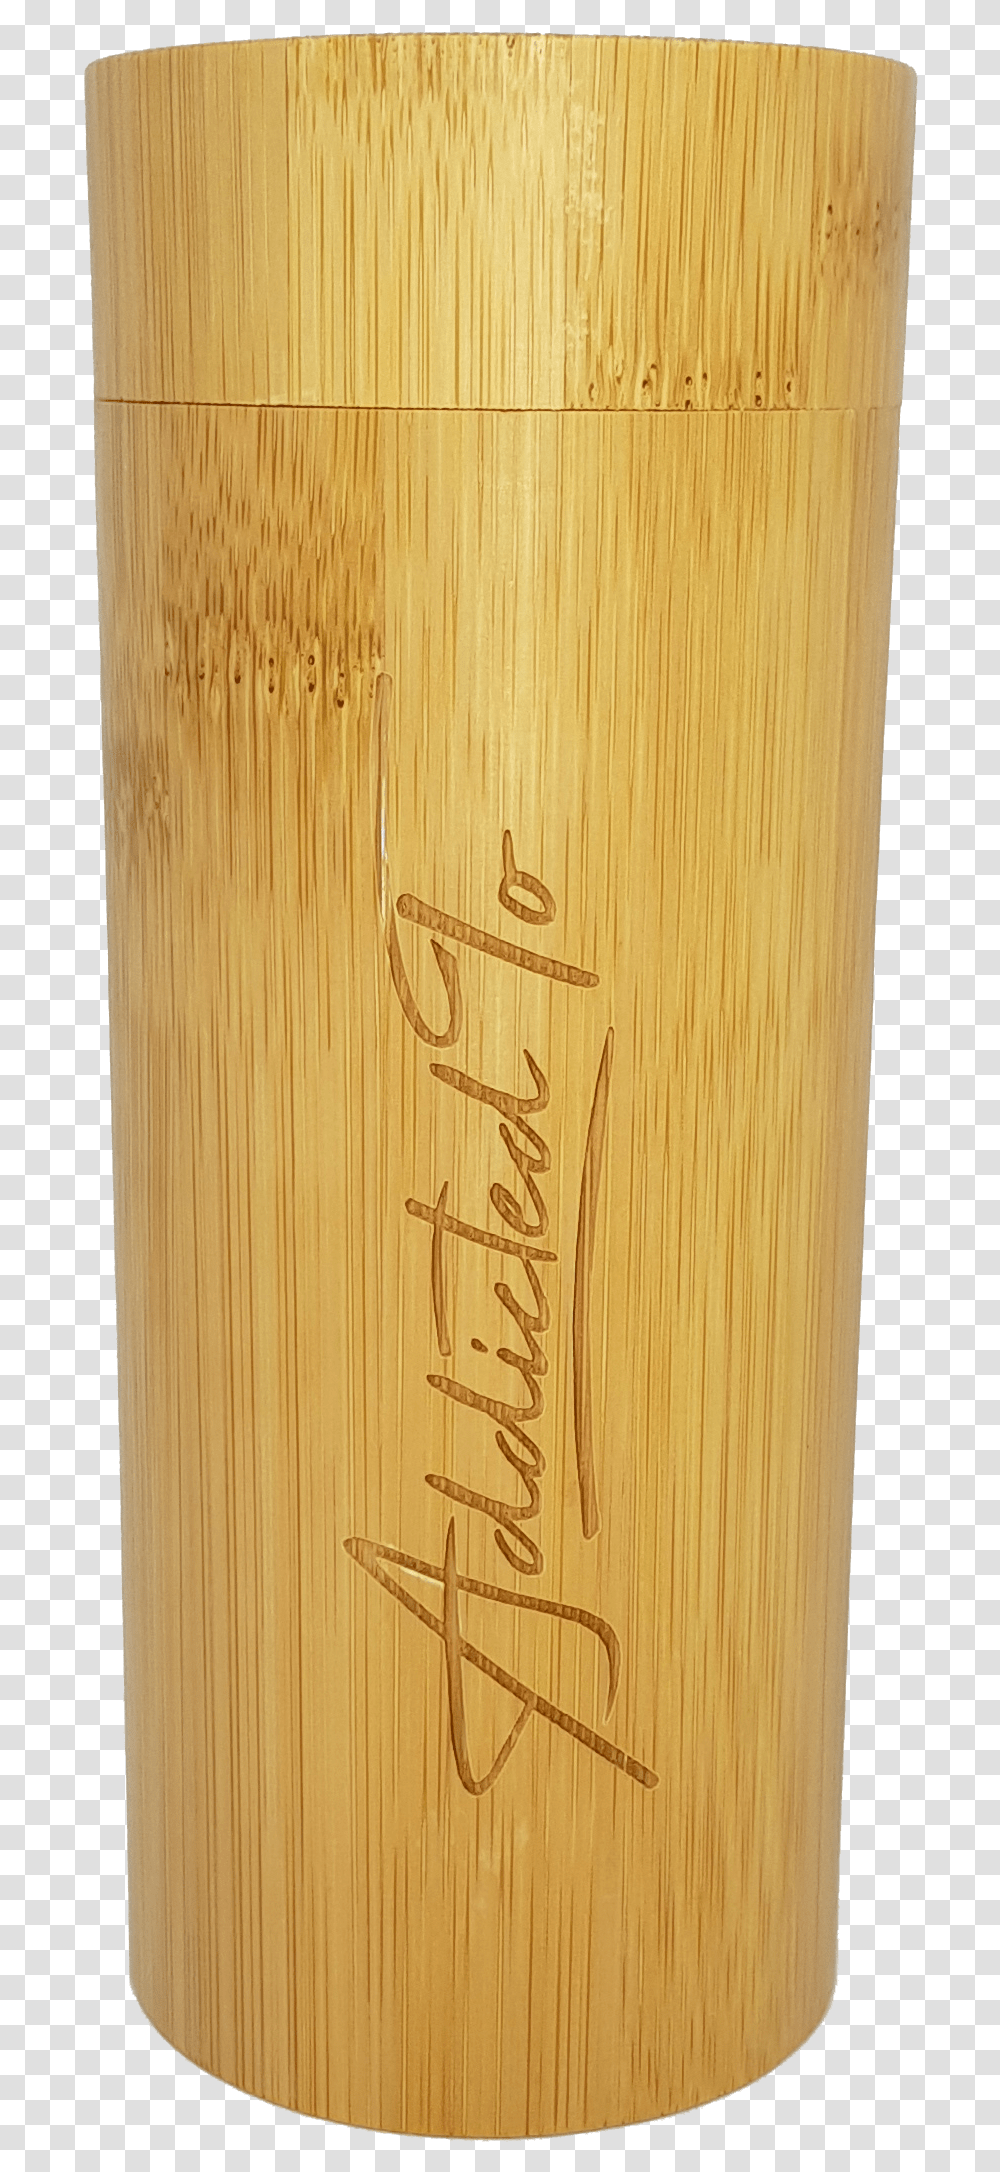 Bamboo Case High Quality For Sunglasses Addicted To Plywood, Handwriting, Rug, Signature Transparent Png